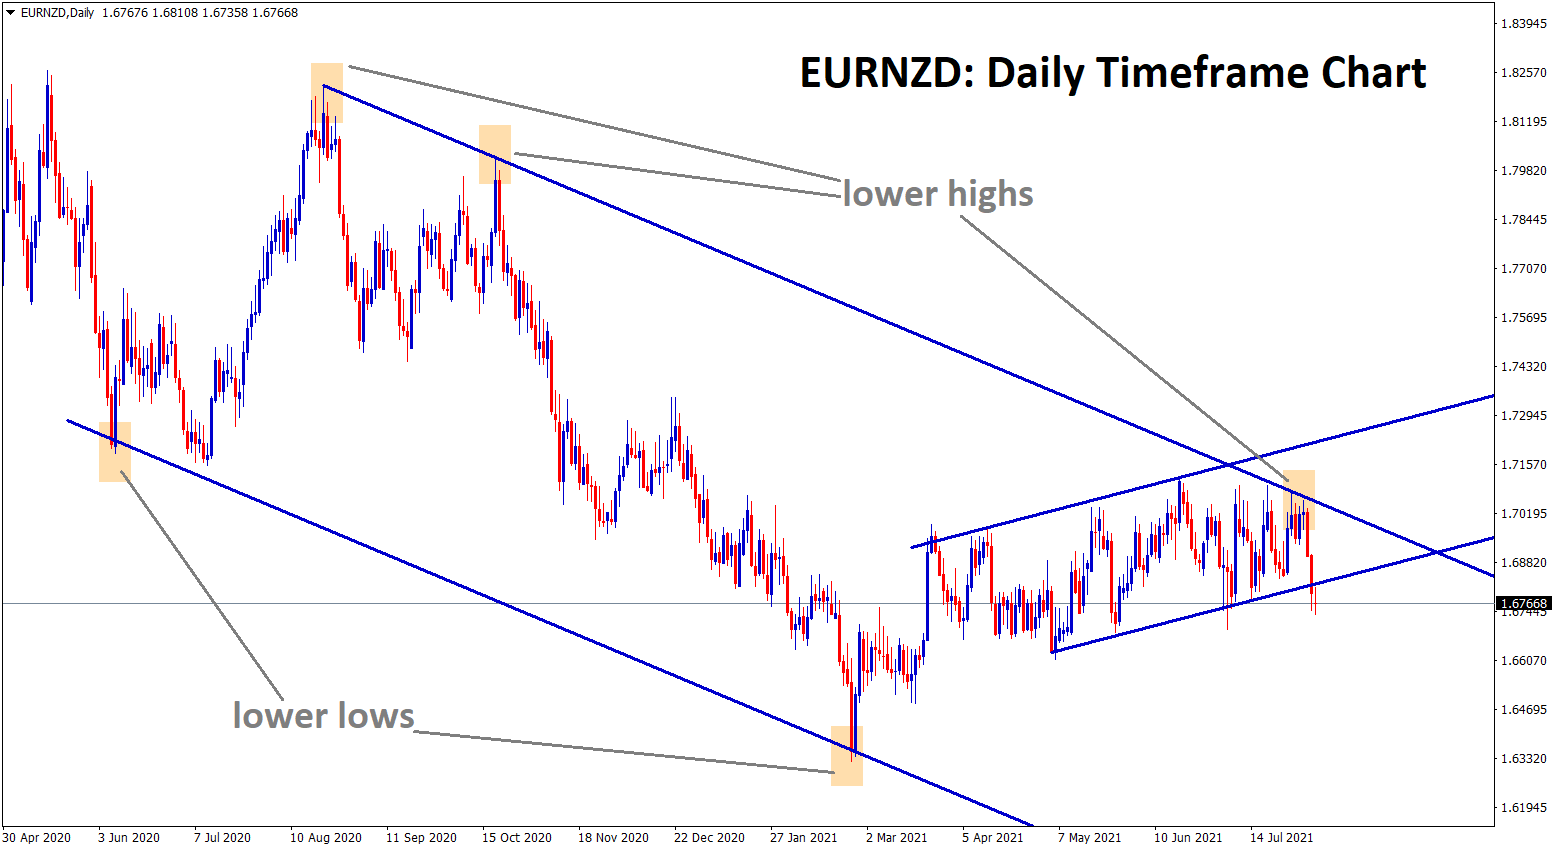 EURNZD starts to fall from the lower high zone of the descending channel